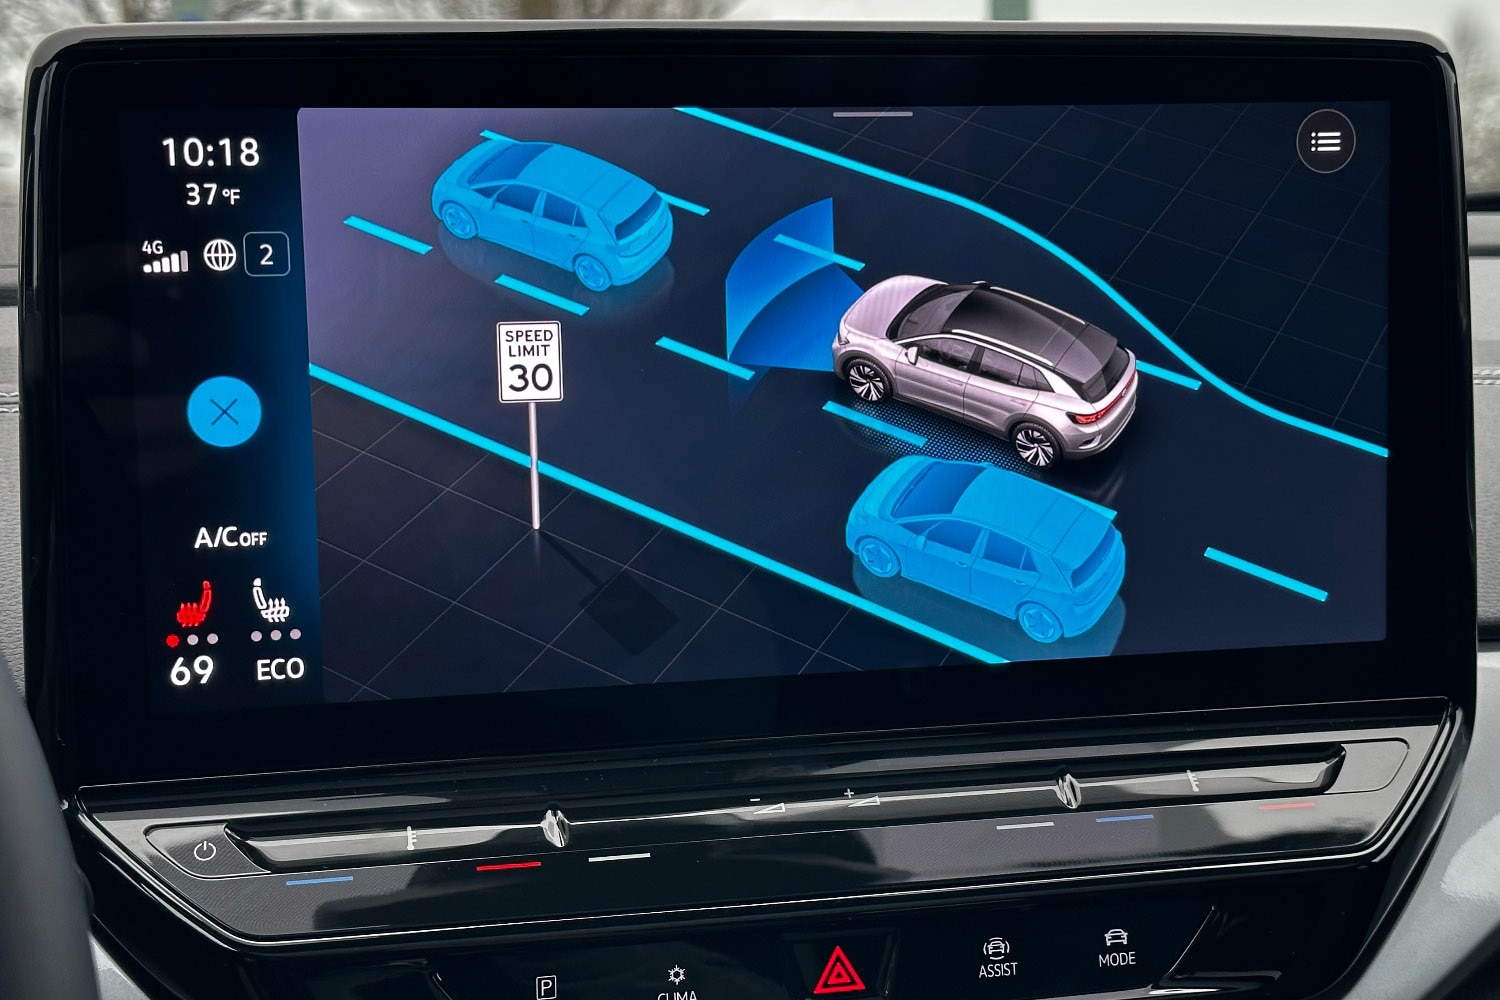 2023 Volkswagen ID.4 AWD safety system on infotainment screen